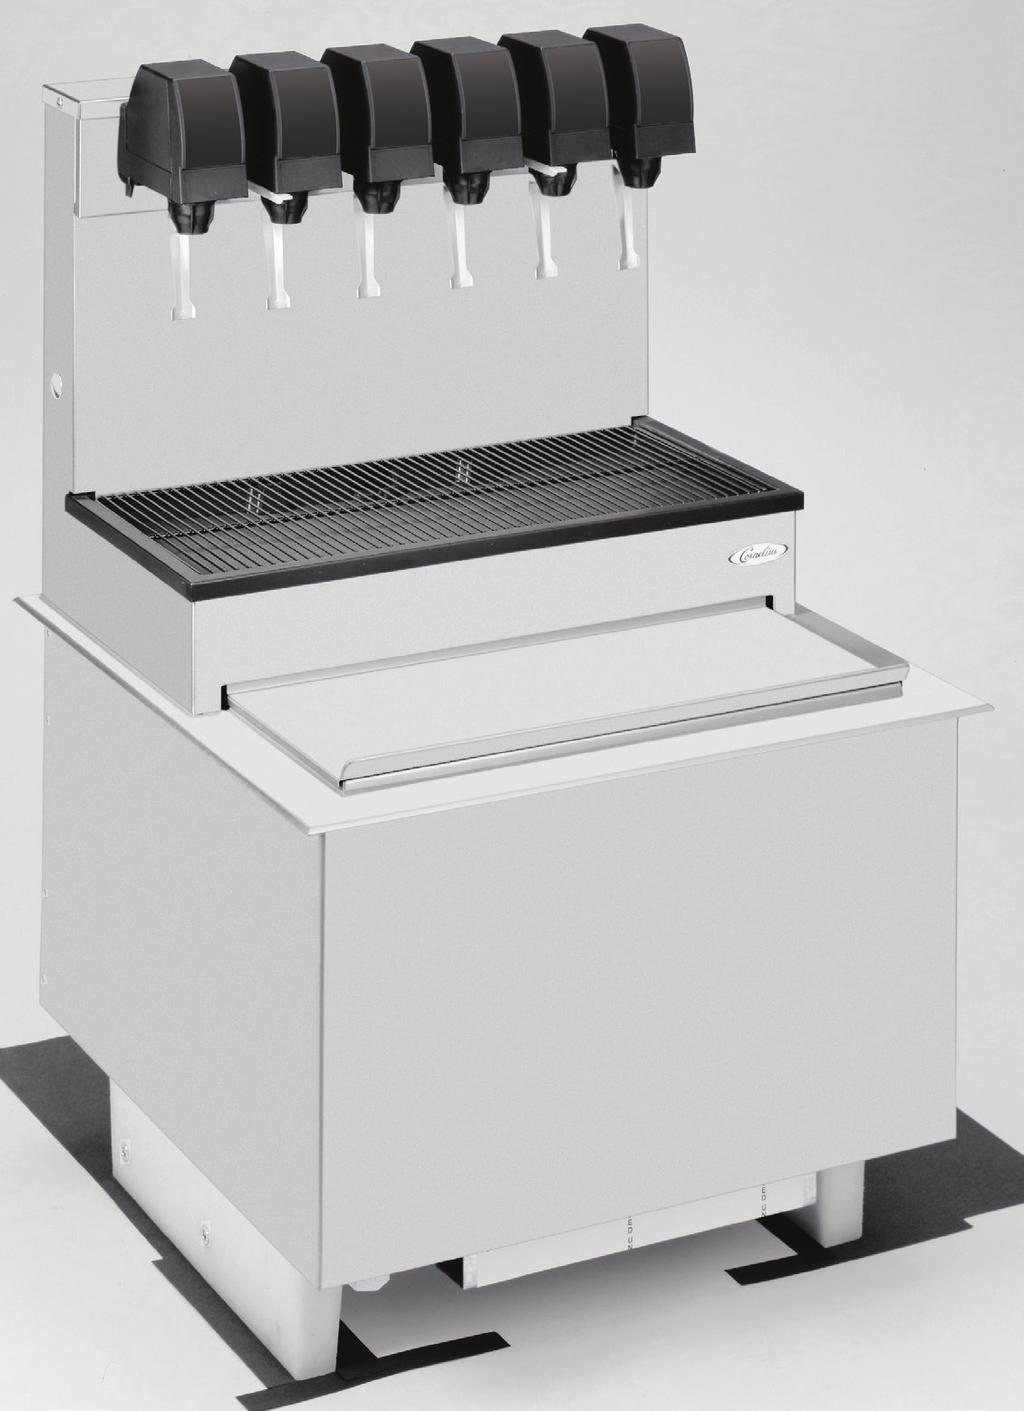 2323 HIGH PERFORMANCE POST-MIX DROP-IN DISPENSER FEATURES Large ice capacity - Ice chest has 80 or 100 lb capacity Options - Available with 5, 6, or 8 valves (8 valve has 2 ambient syrups and 6